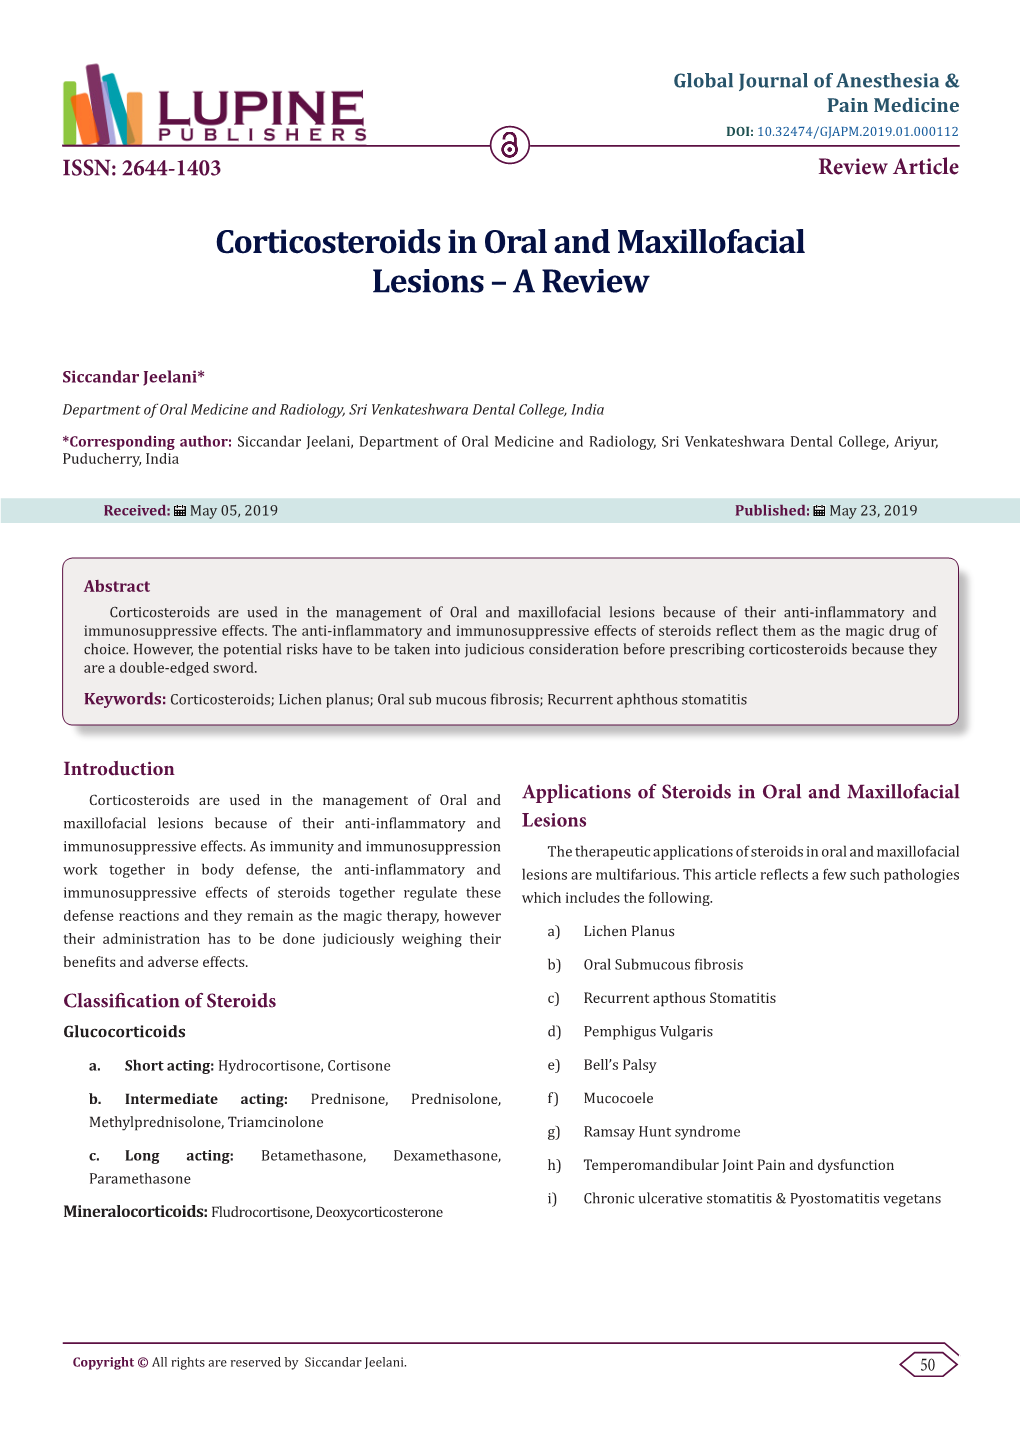 Corticosteroids in Oral and Maxillofacial Lesions – a Review